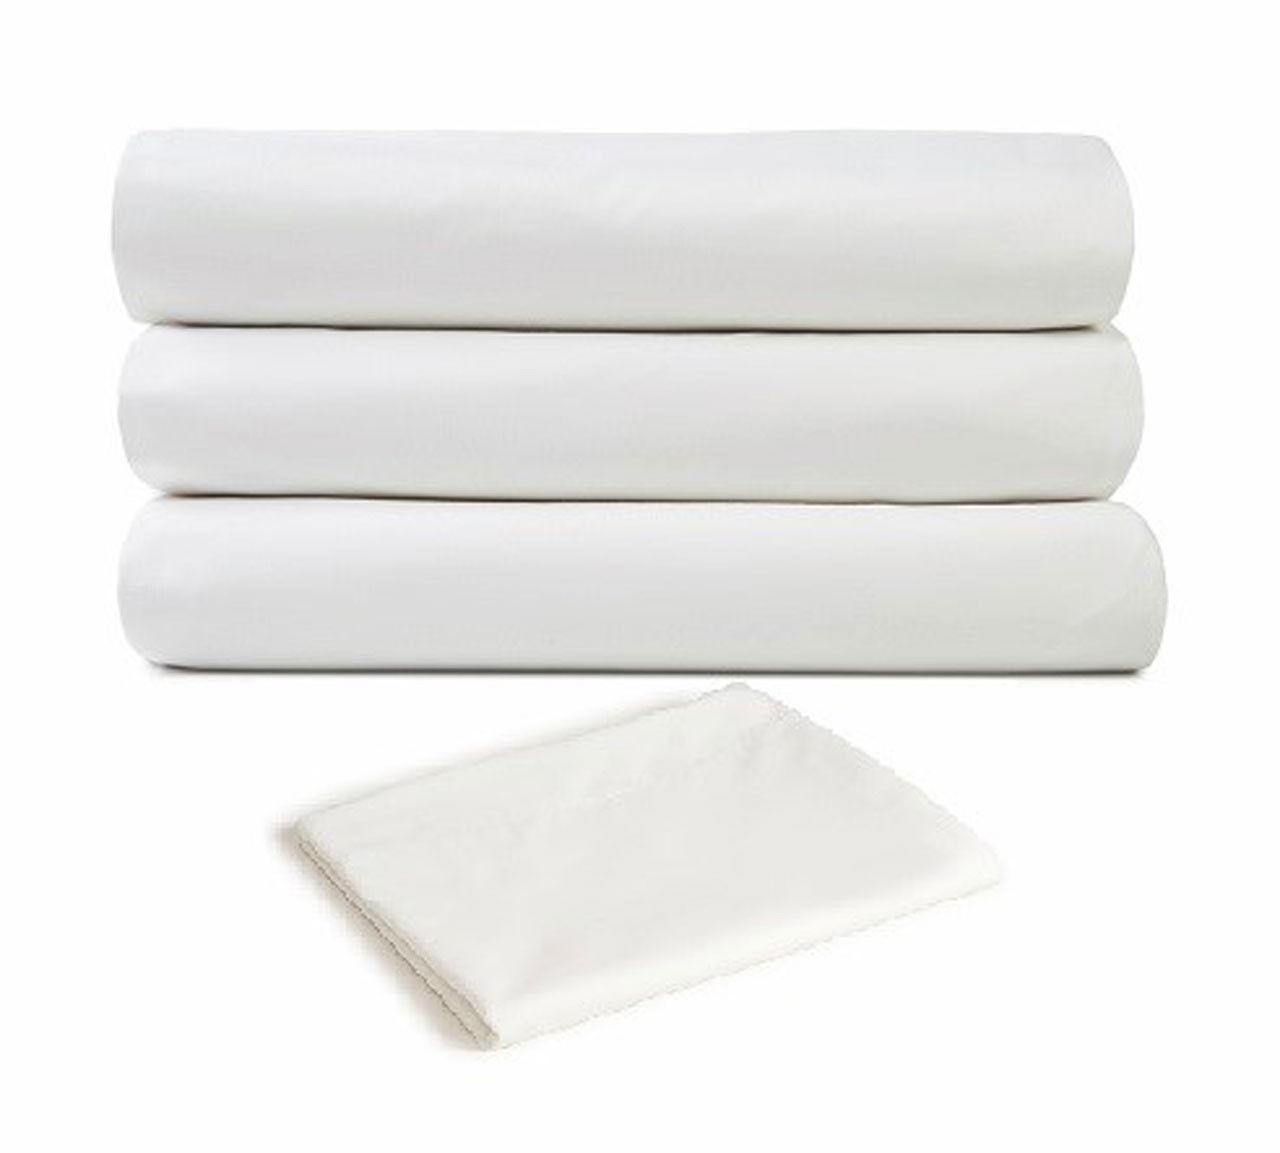 Is the T310 Premium Bed Sheet in 60/40 cotton poly blend fabric available in different colors?